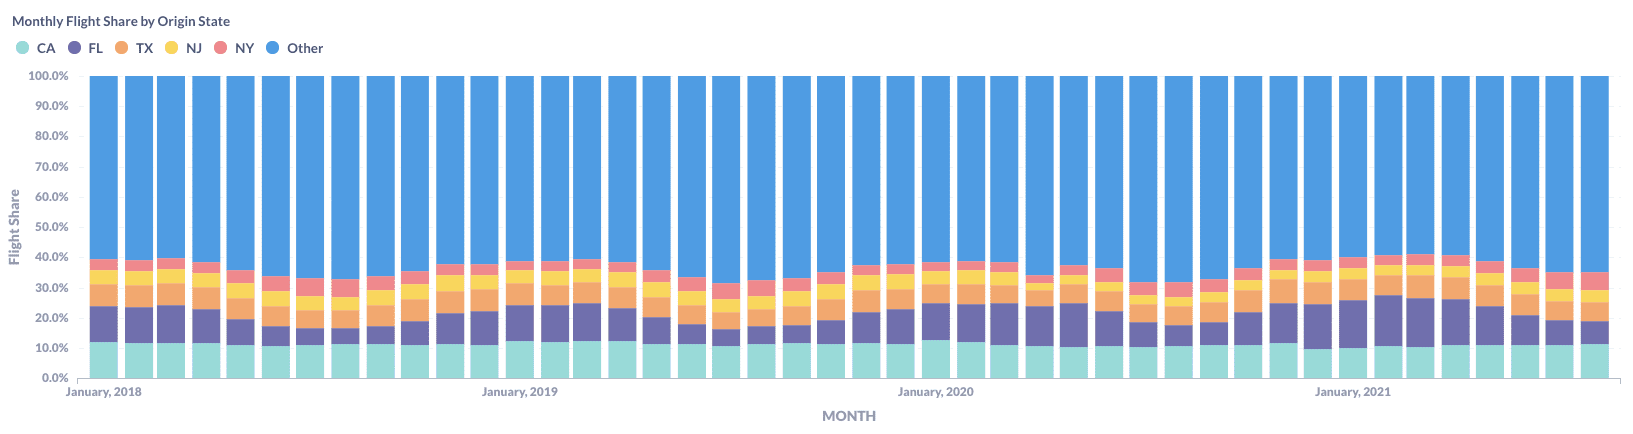 Monthly Flight Share by Origin State